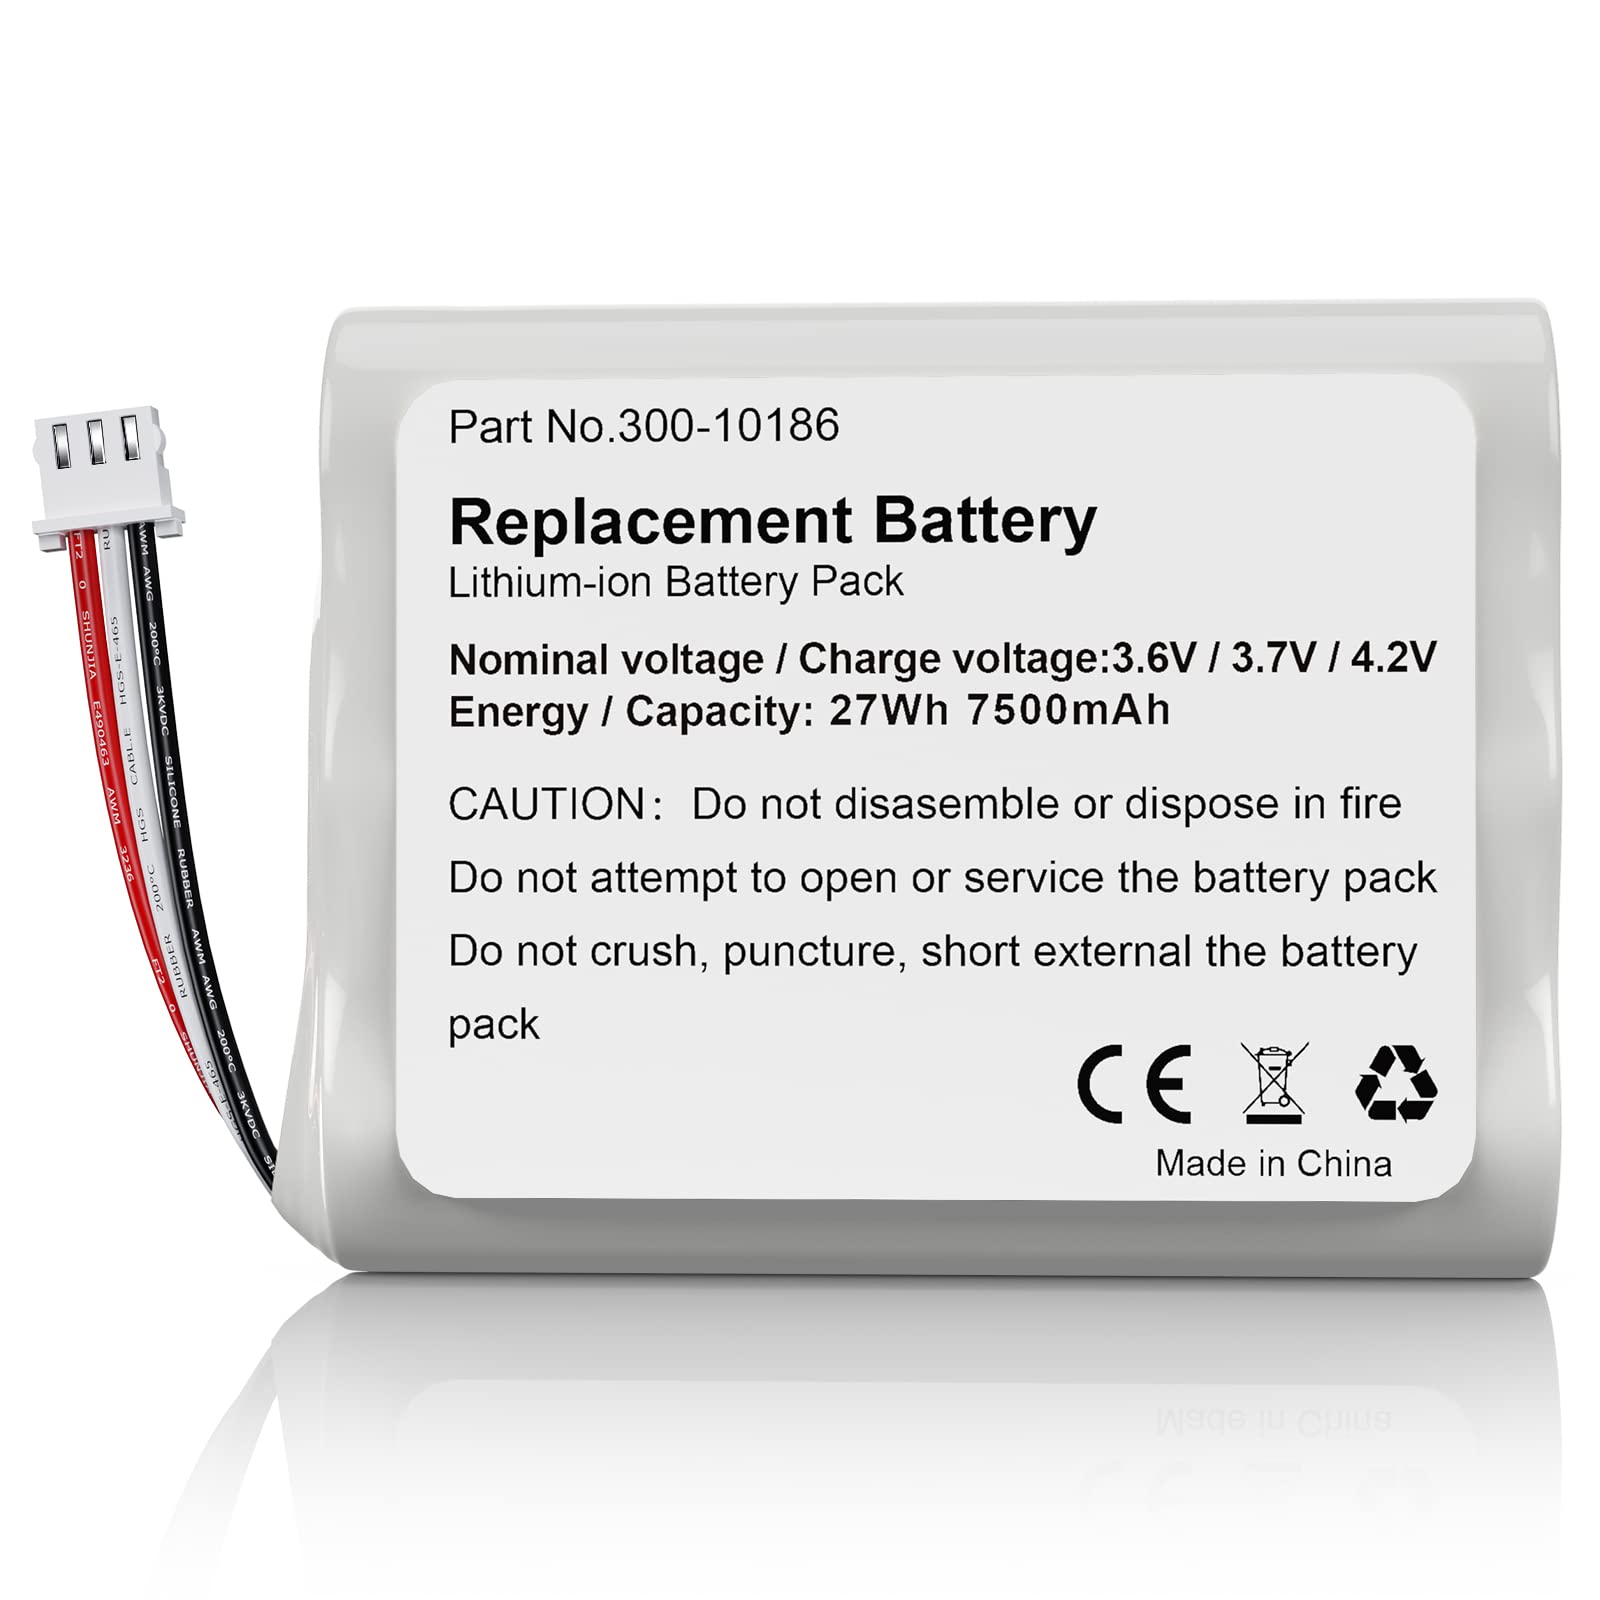 Loqdivr Replacement Battery 300-10186 for ADT Command Smart Security Panel ADT5AIO-1 | ADT5AIO-2 | ADT5AIO-3 | ADT7AIO-1 | Honeywell ADT2X16AIO-1| ADT2X16AIO-2, 3.7V